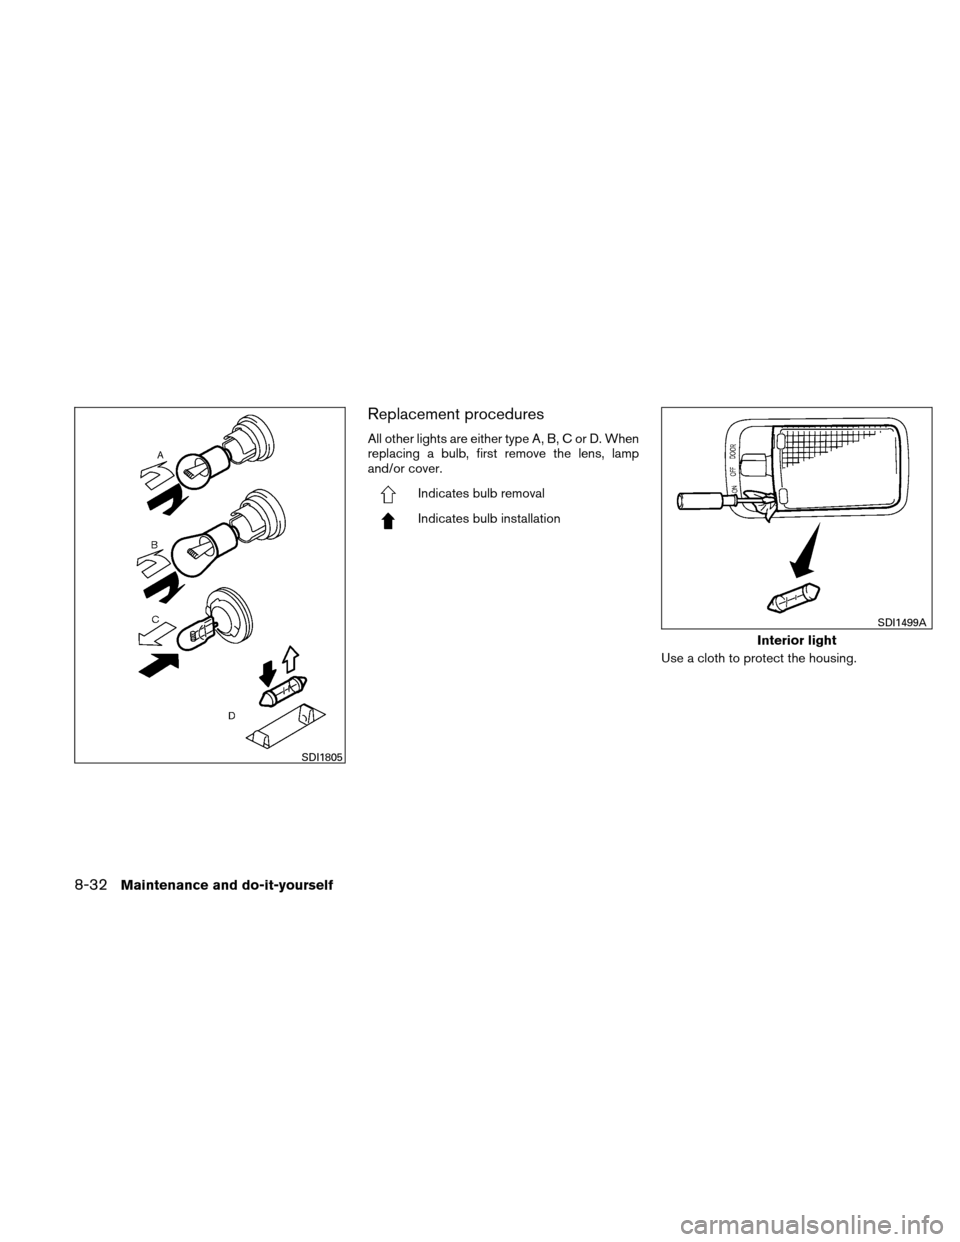 NISSAN VERSA HATCHBACK 2010 1.G Owners Manual Replacement procedures
All other lights are either type A, B, C or D. When
replacing a bulb, first remove the lens, lamp
and/or cover.
Indicates bulb removal
Indicates bulb installationUse a cloth to 